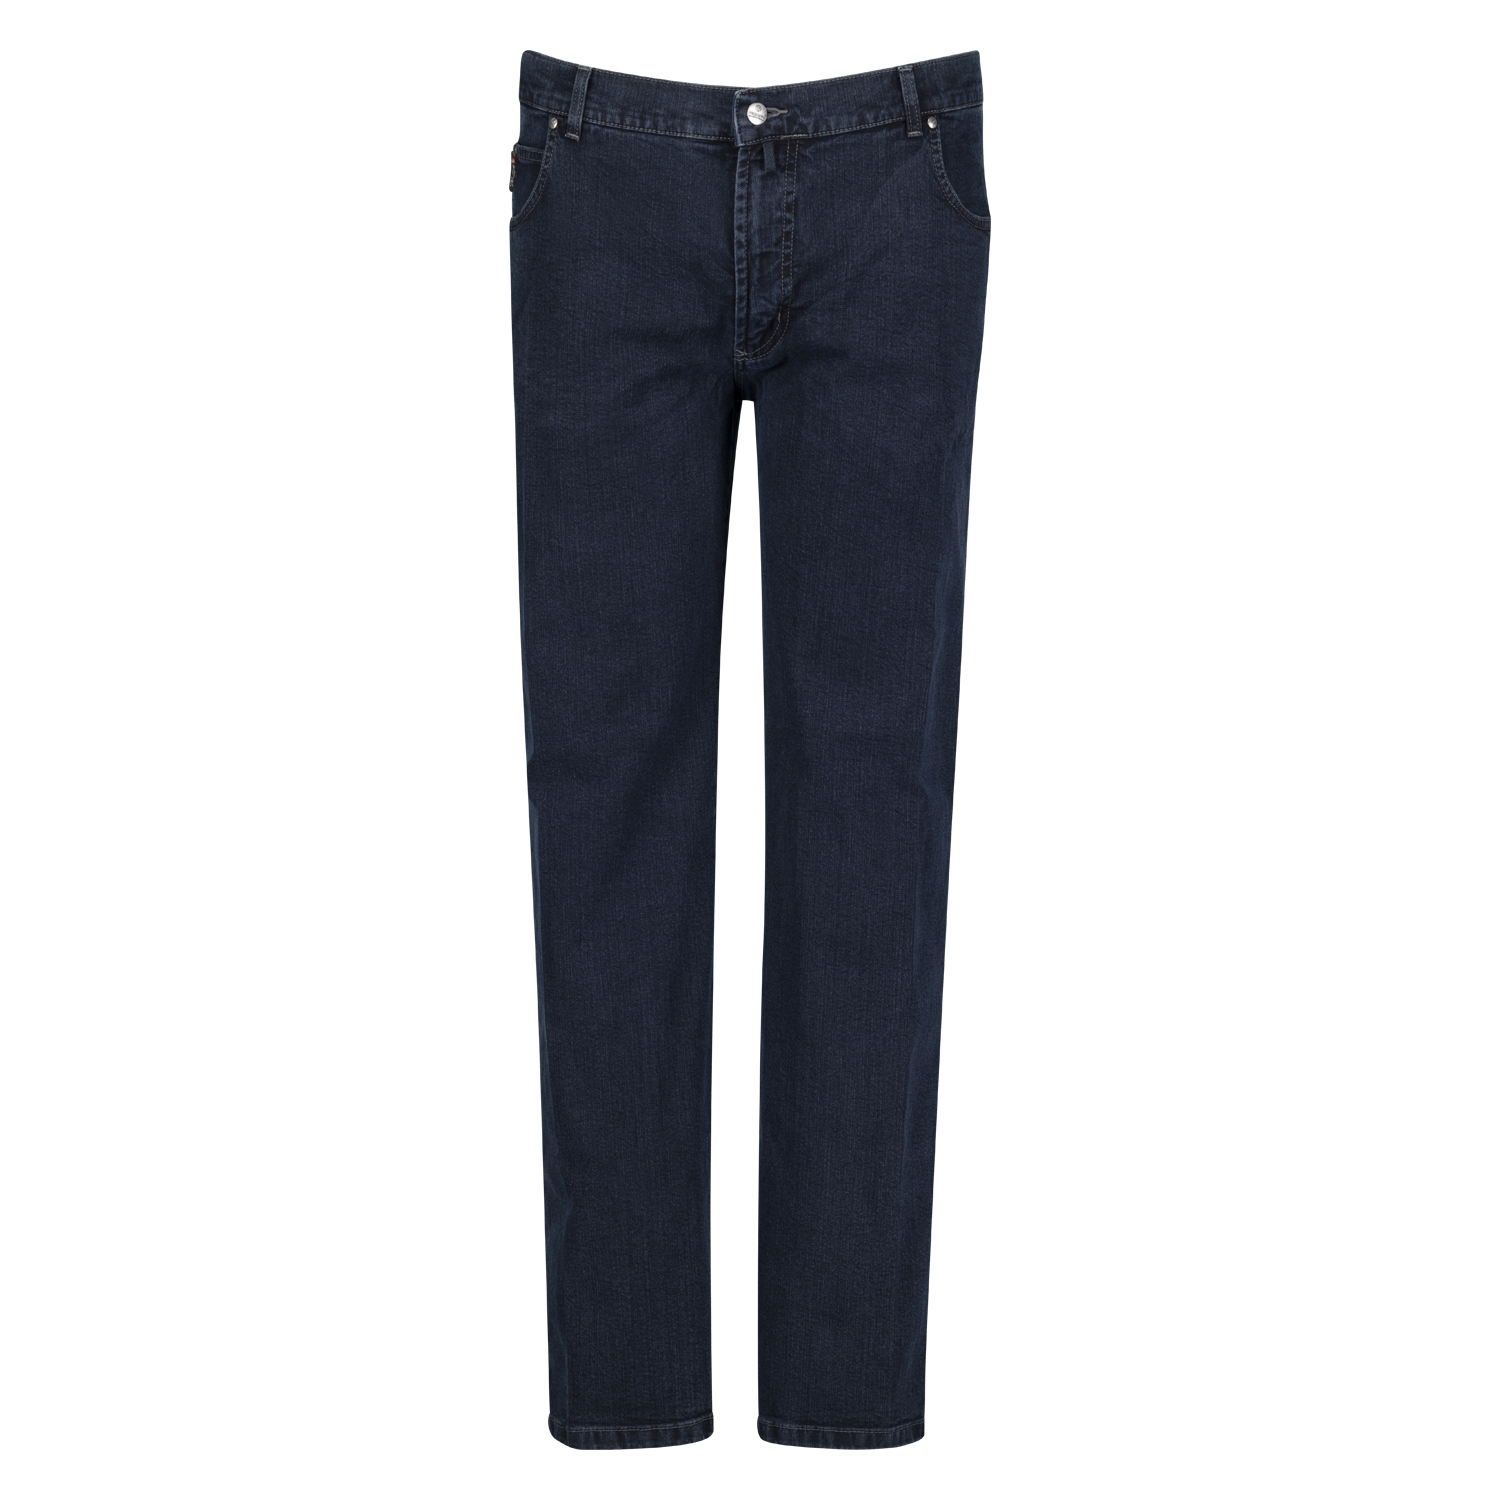 5-Pocket Jeans homme avec stretch "Peter" dark blue stonewash by Pioneer grandes tailles (Taille haute): 59 - 85